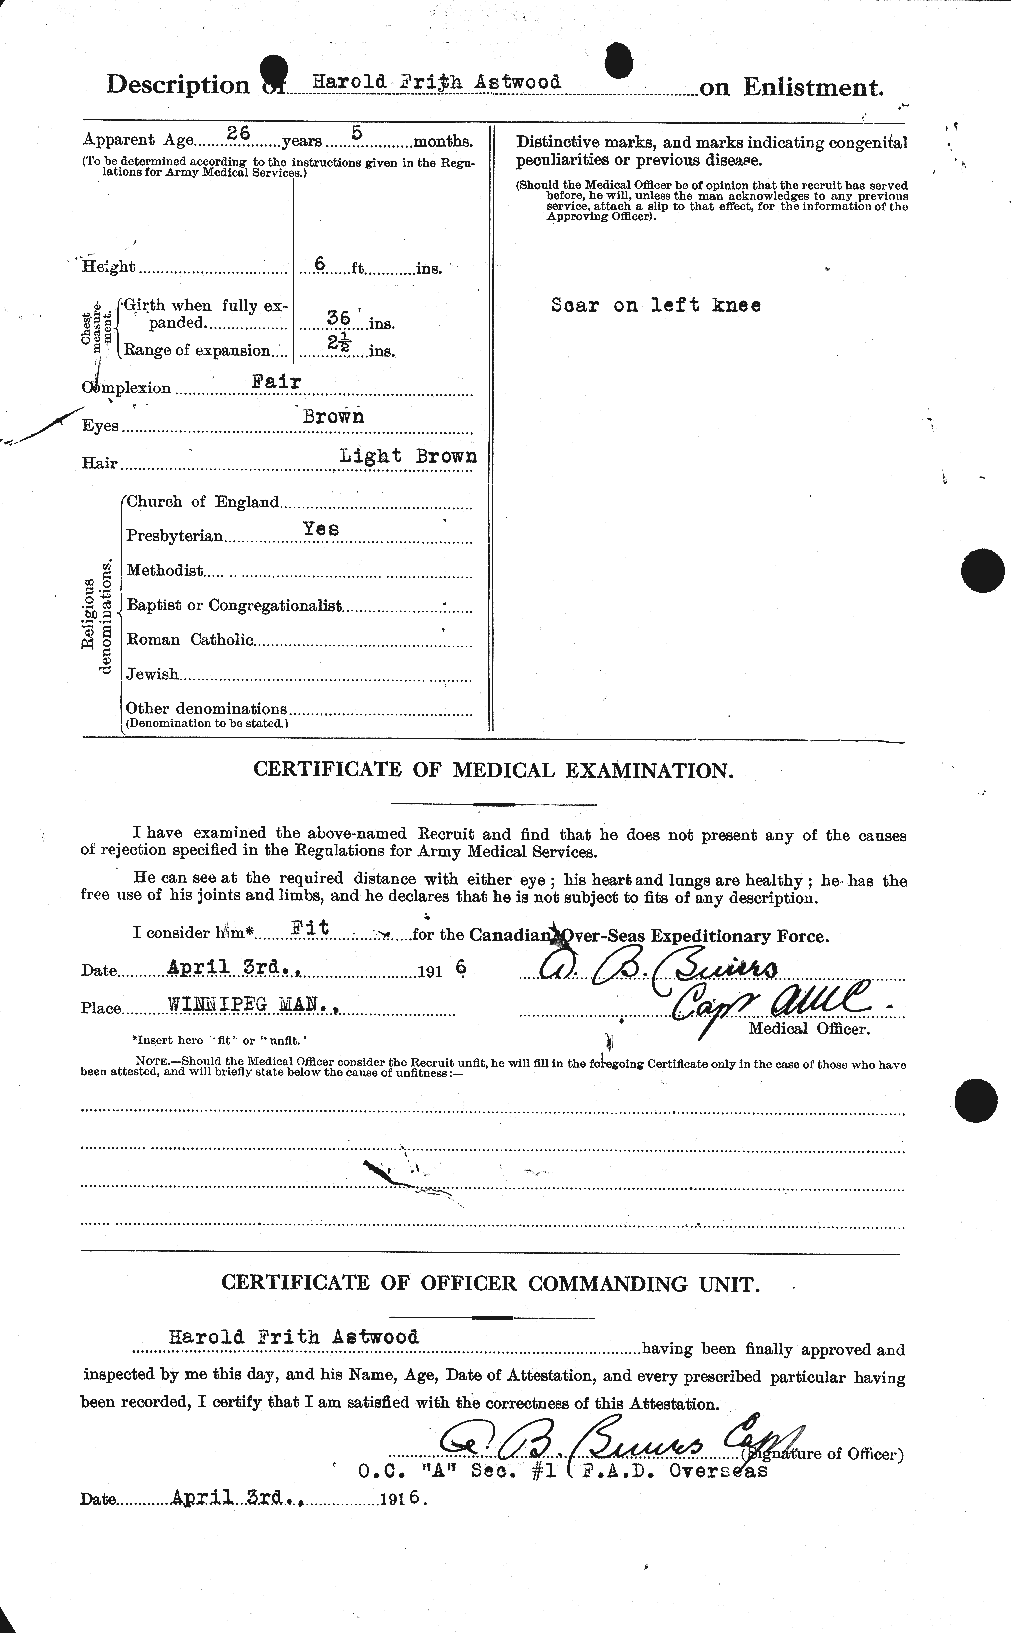 Personnel Records of the First World War - CEF 217061b